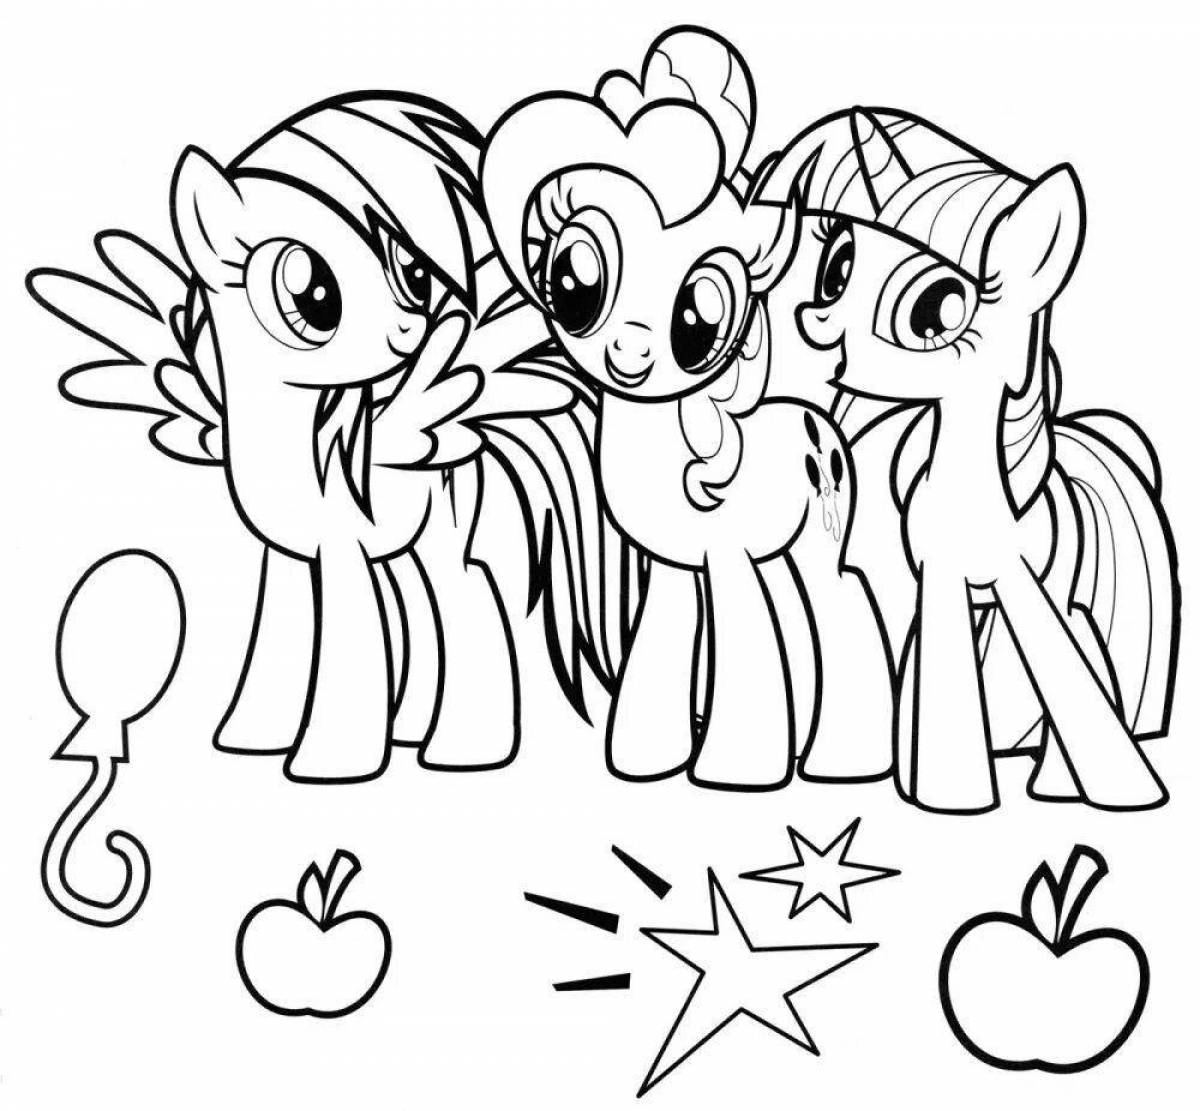 Coloring page joyful may little pony